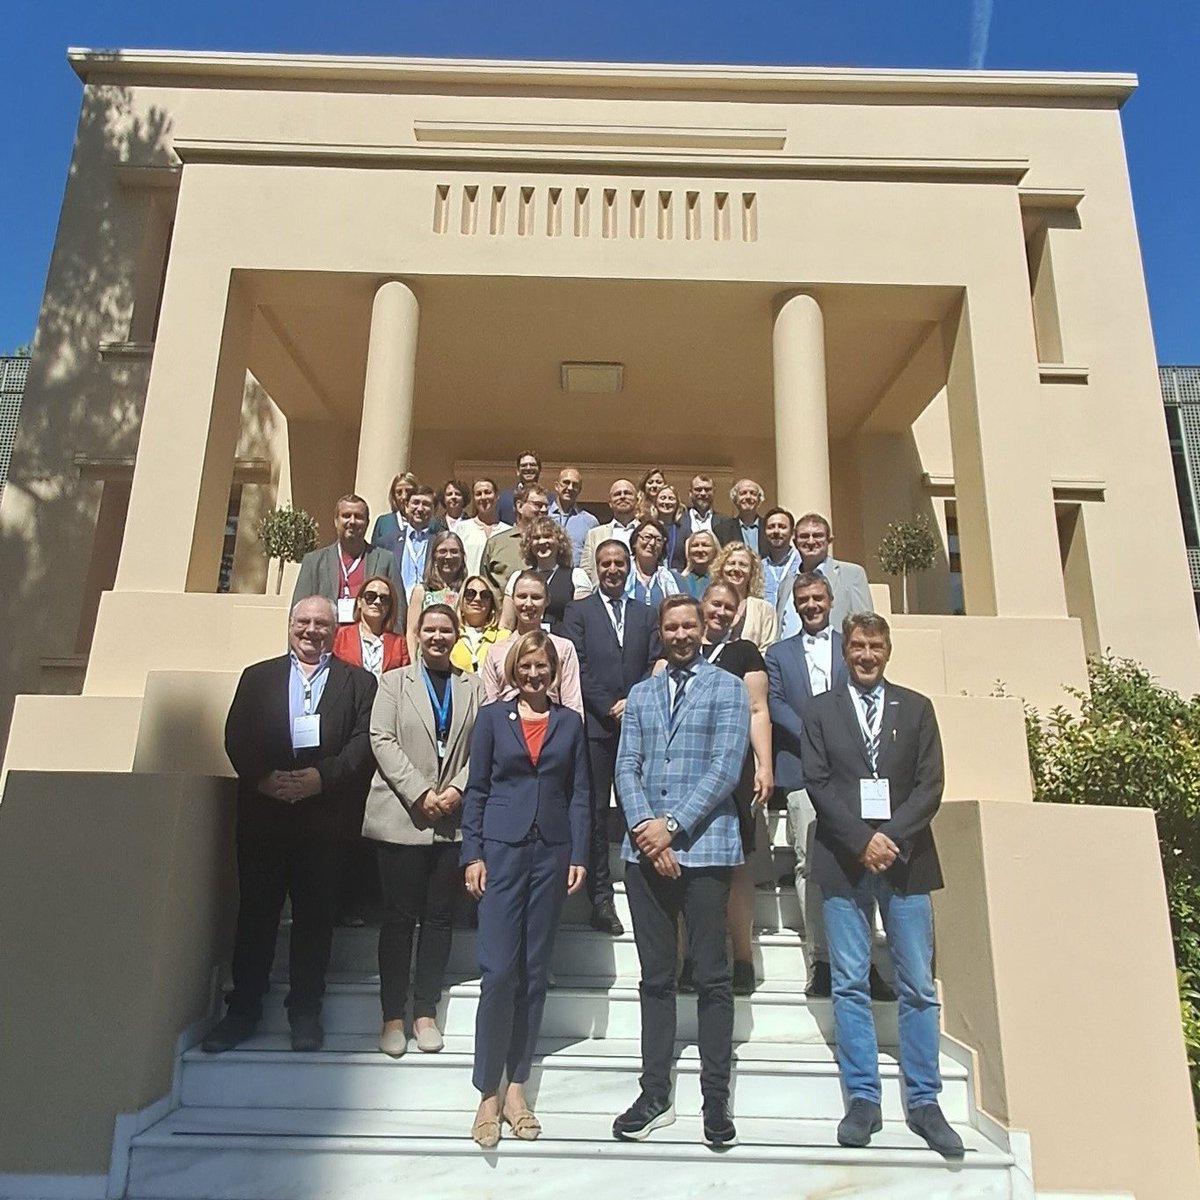 Welcoming the #ENISA Advisory Group back to Athens for a meeting including ➡ An address by Chair-elect of ENISA Management Board, Fabienne Tegeler ➡ ENISA Strategy on implementing #NIS2 ➡ Awareness raising in a box europa.eu/!kVNXyY